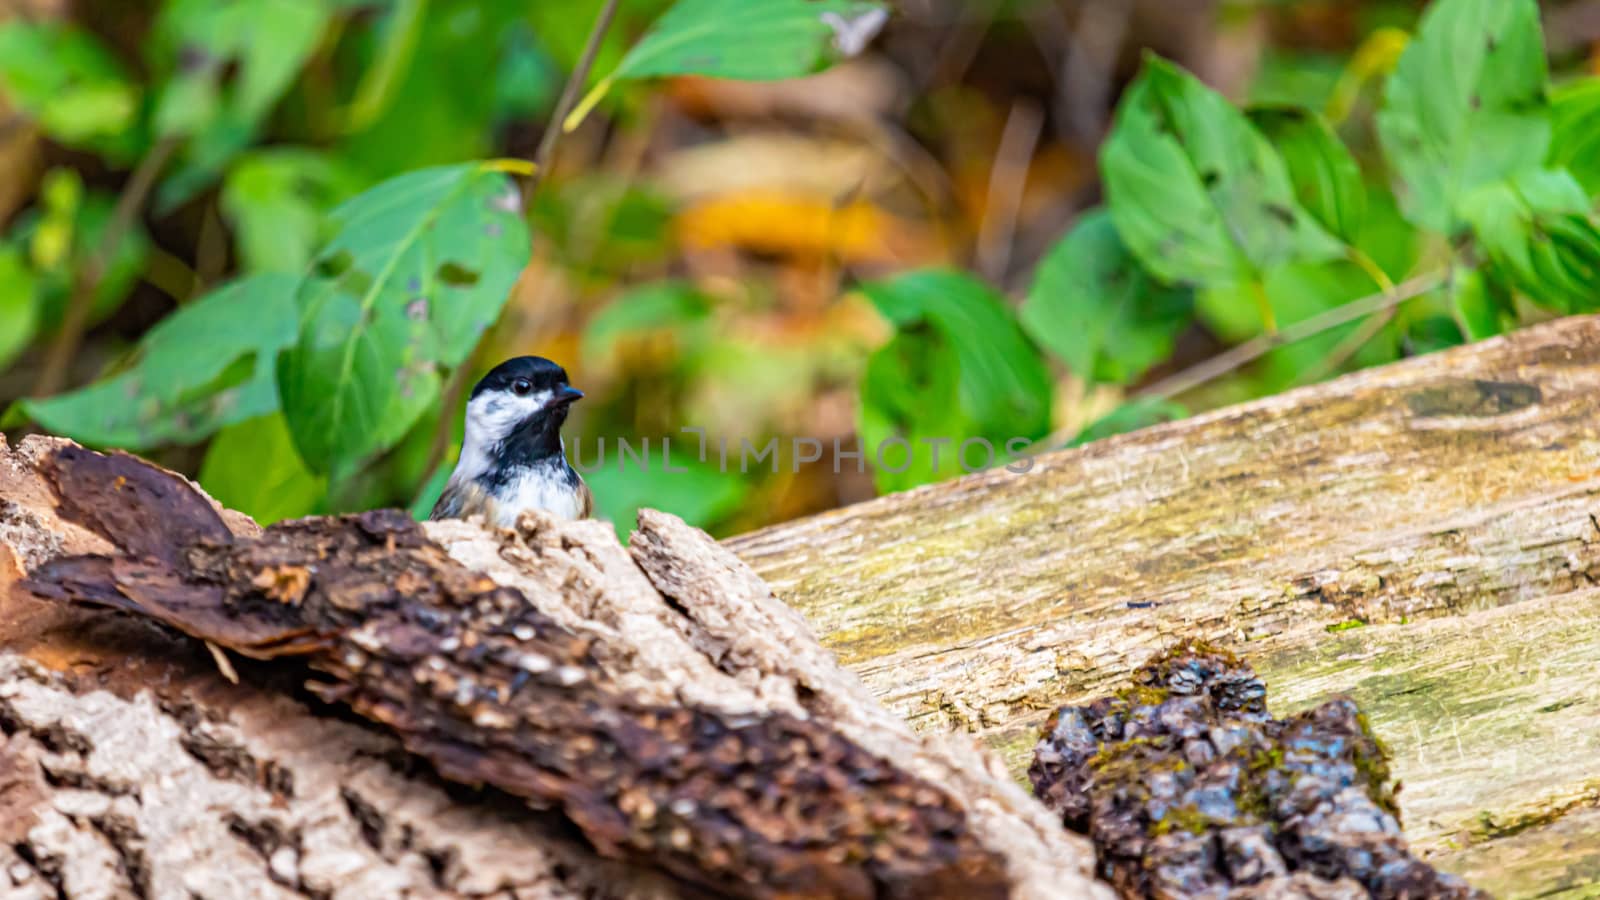 A black-capped chickadee is standing on a wooden bench where some tree bark has fallen. It peeks its head out from its hiding spot, curious about noises nearby.